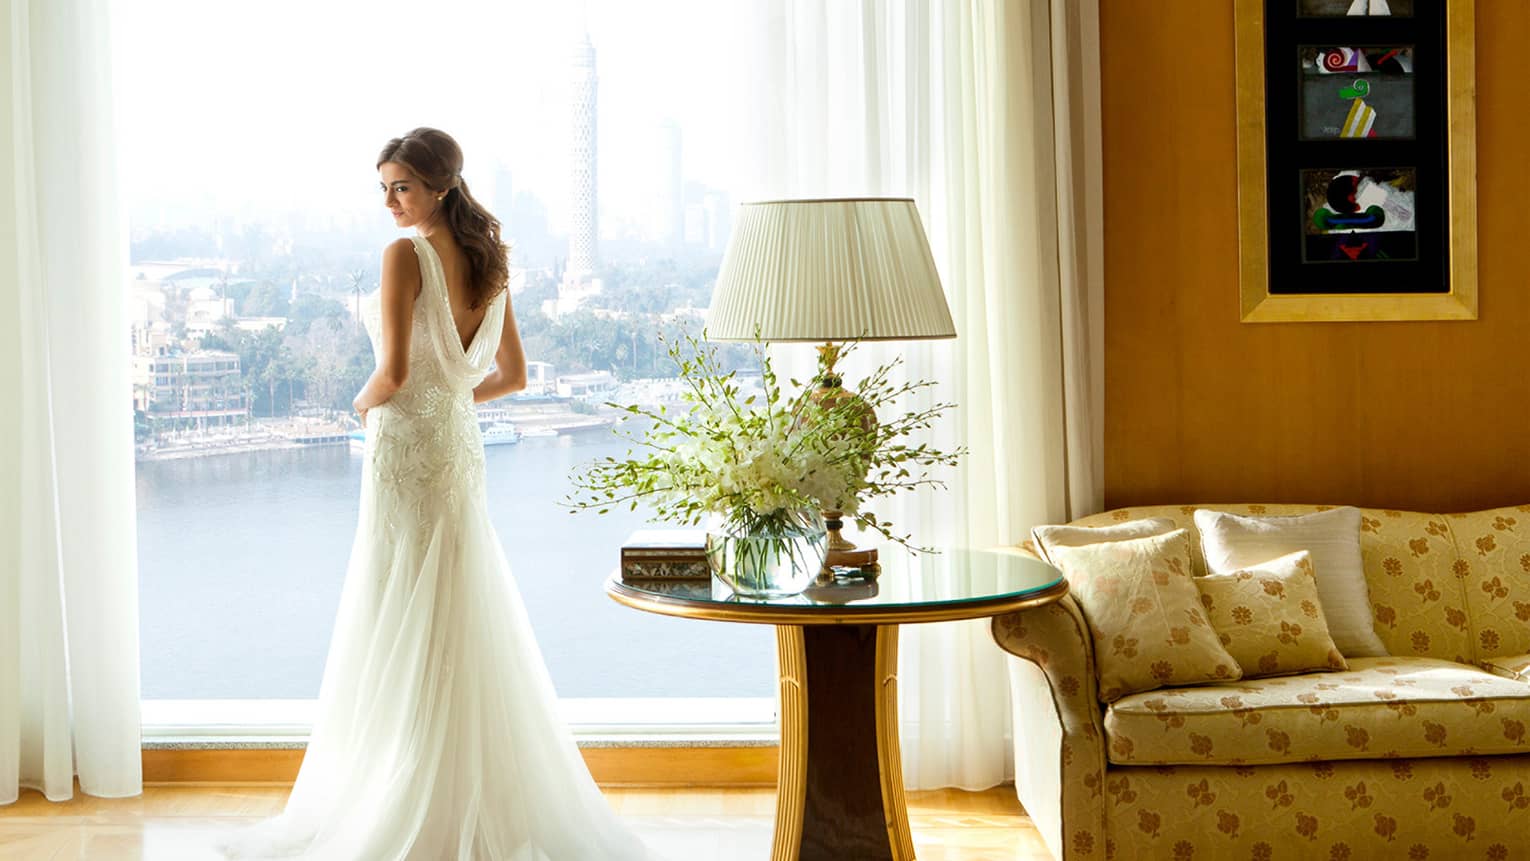 Bride wearing elegant long wedding gown stands at sunny window in hotel suite